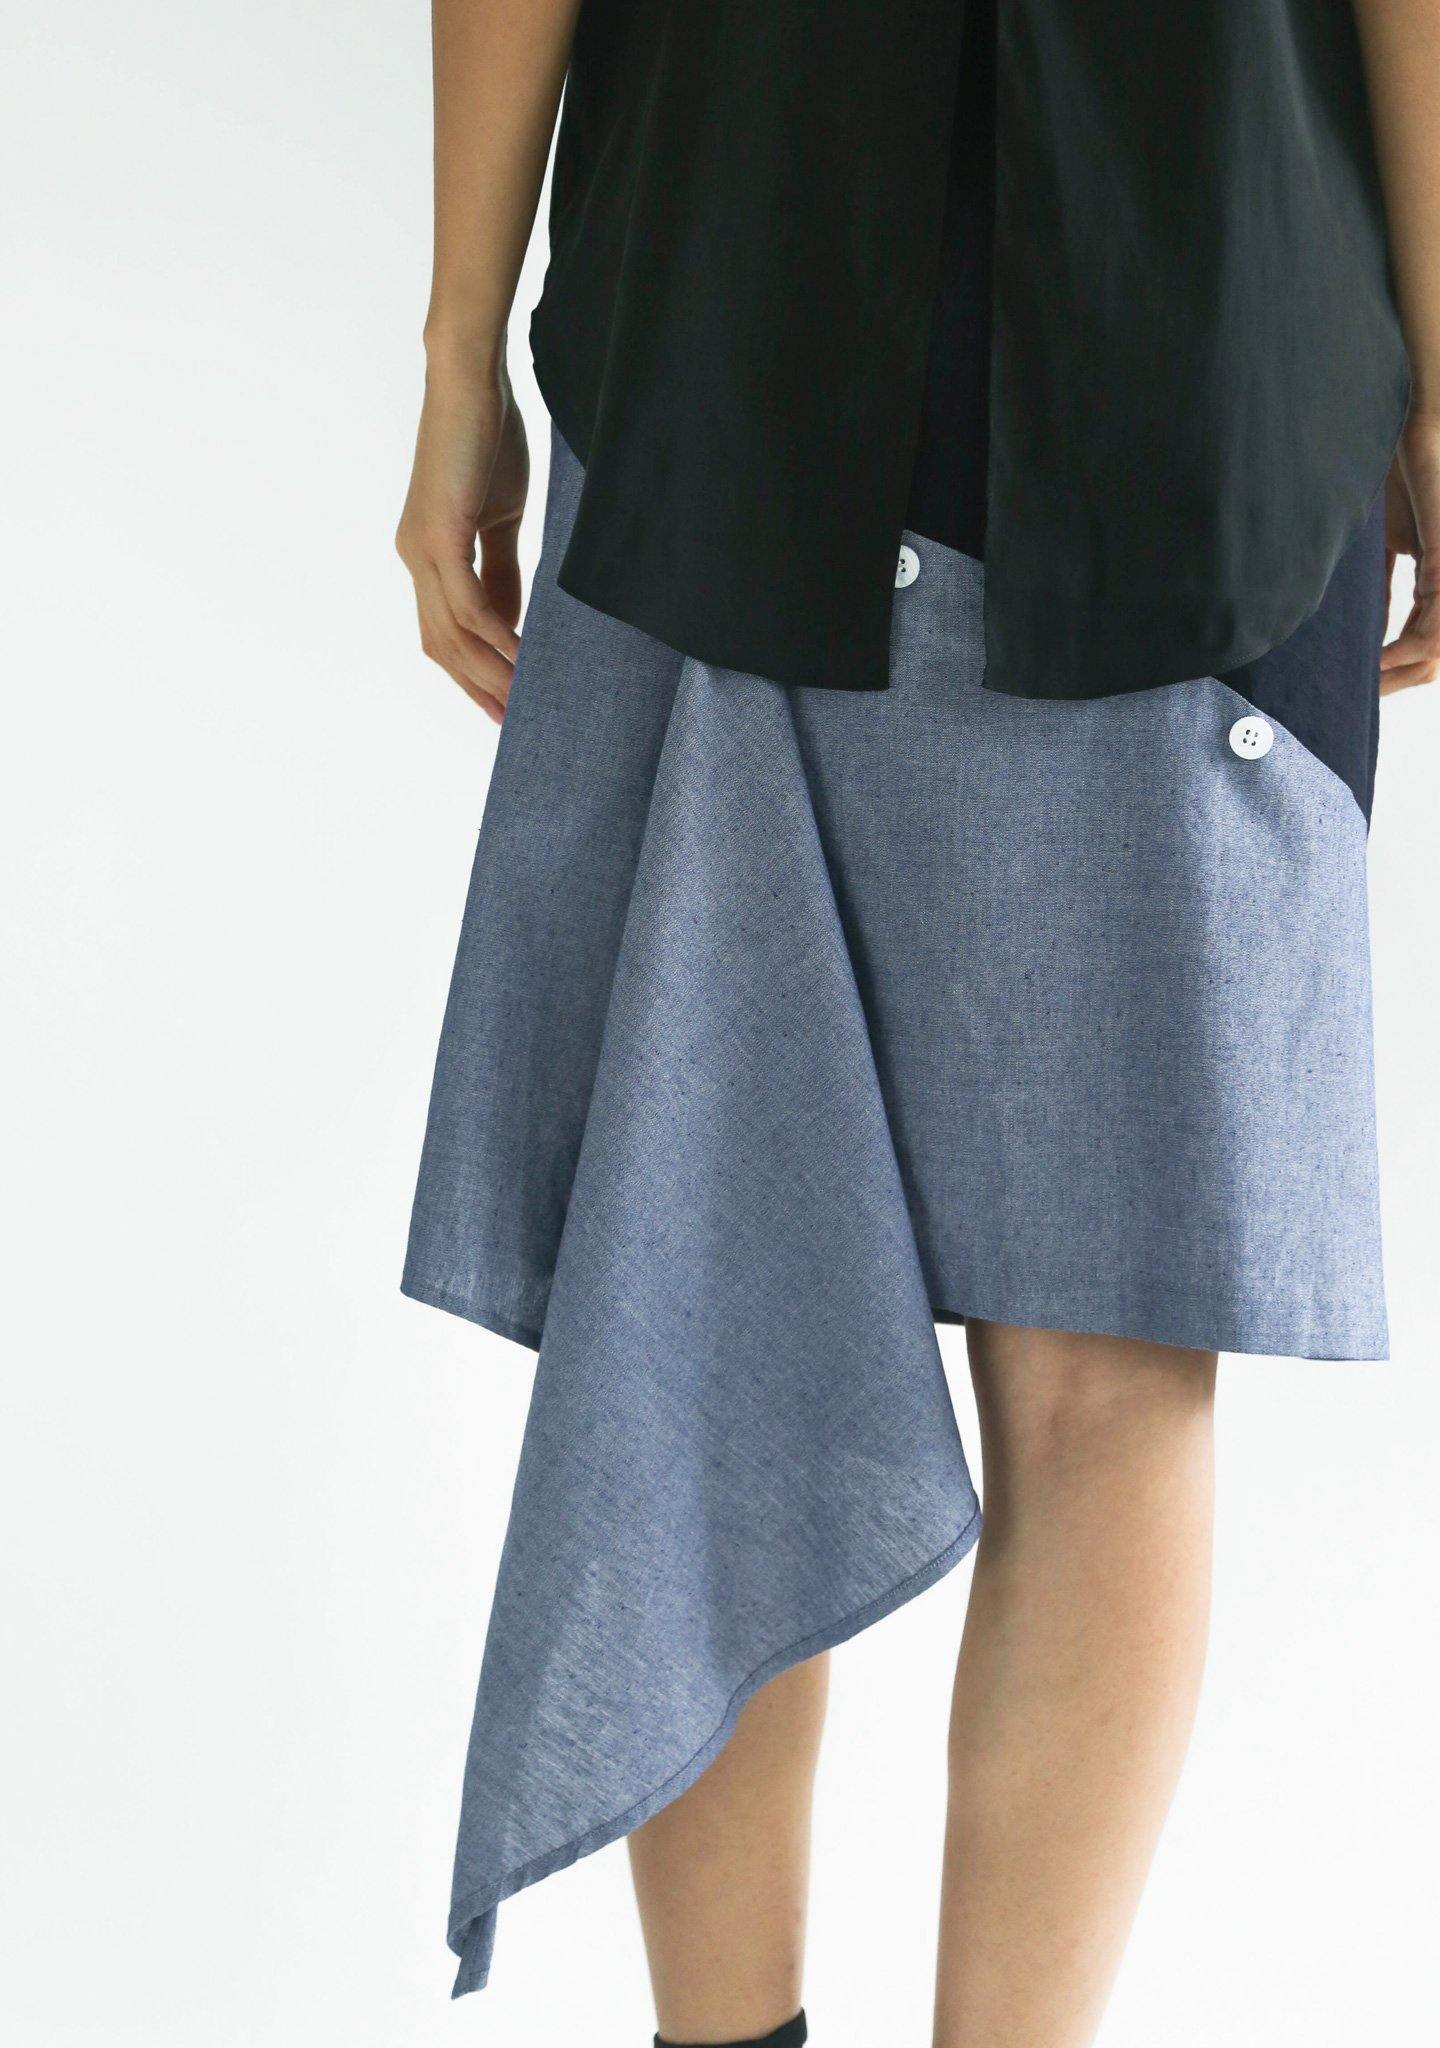 RAVELLO BACK DRAPED BUTTON DETAIL SKIRT IN NAVY CLOUD - SALIENT LABEL